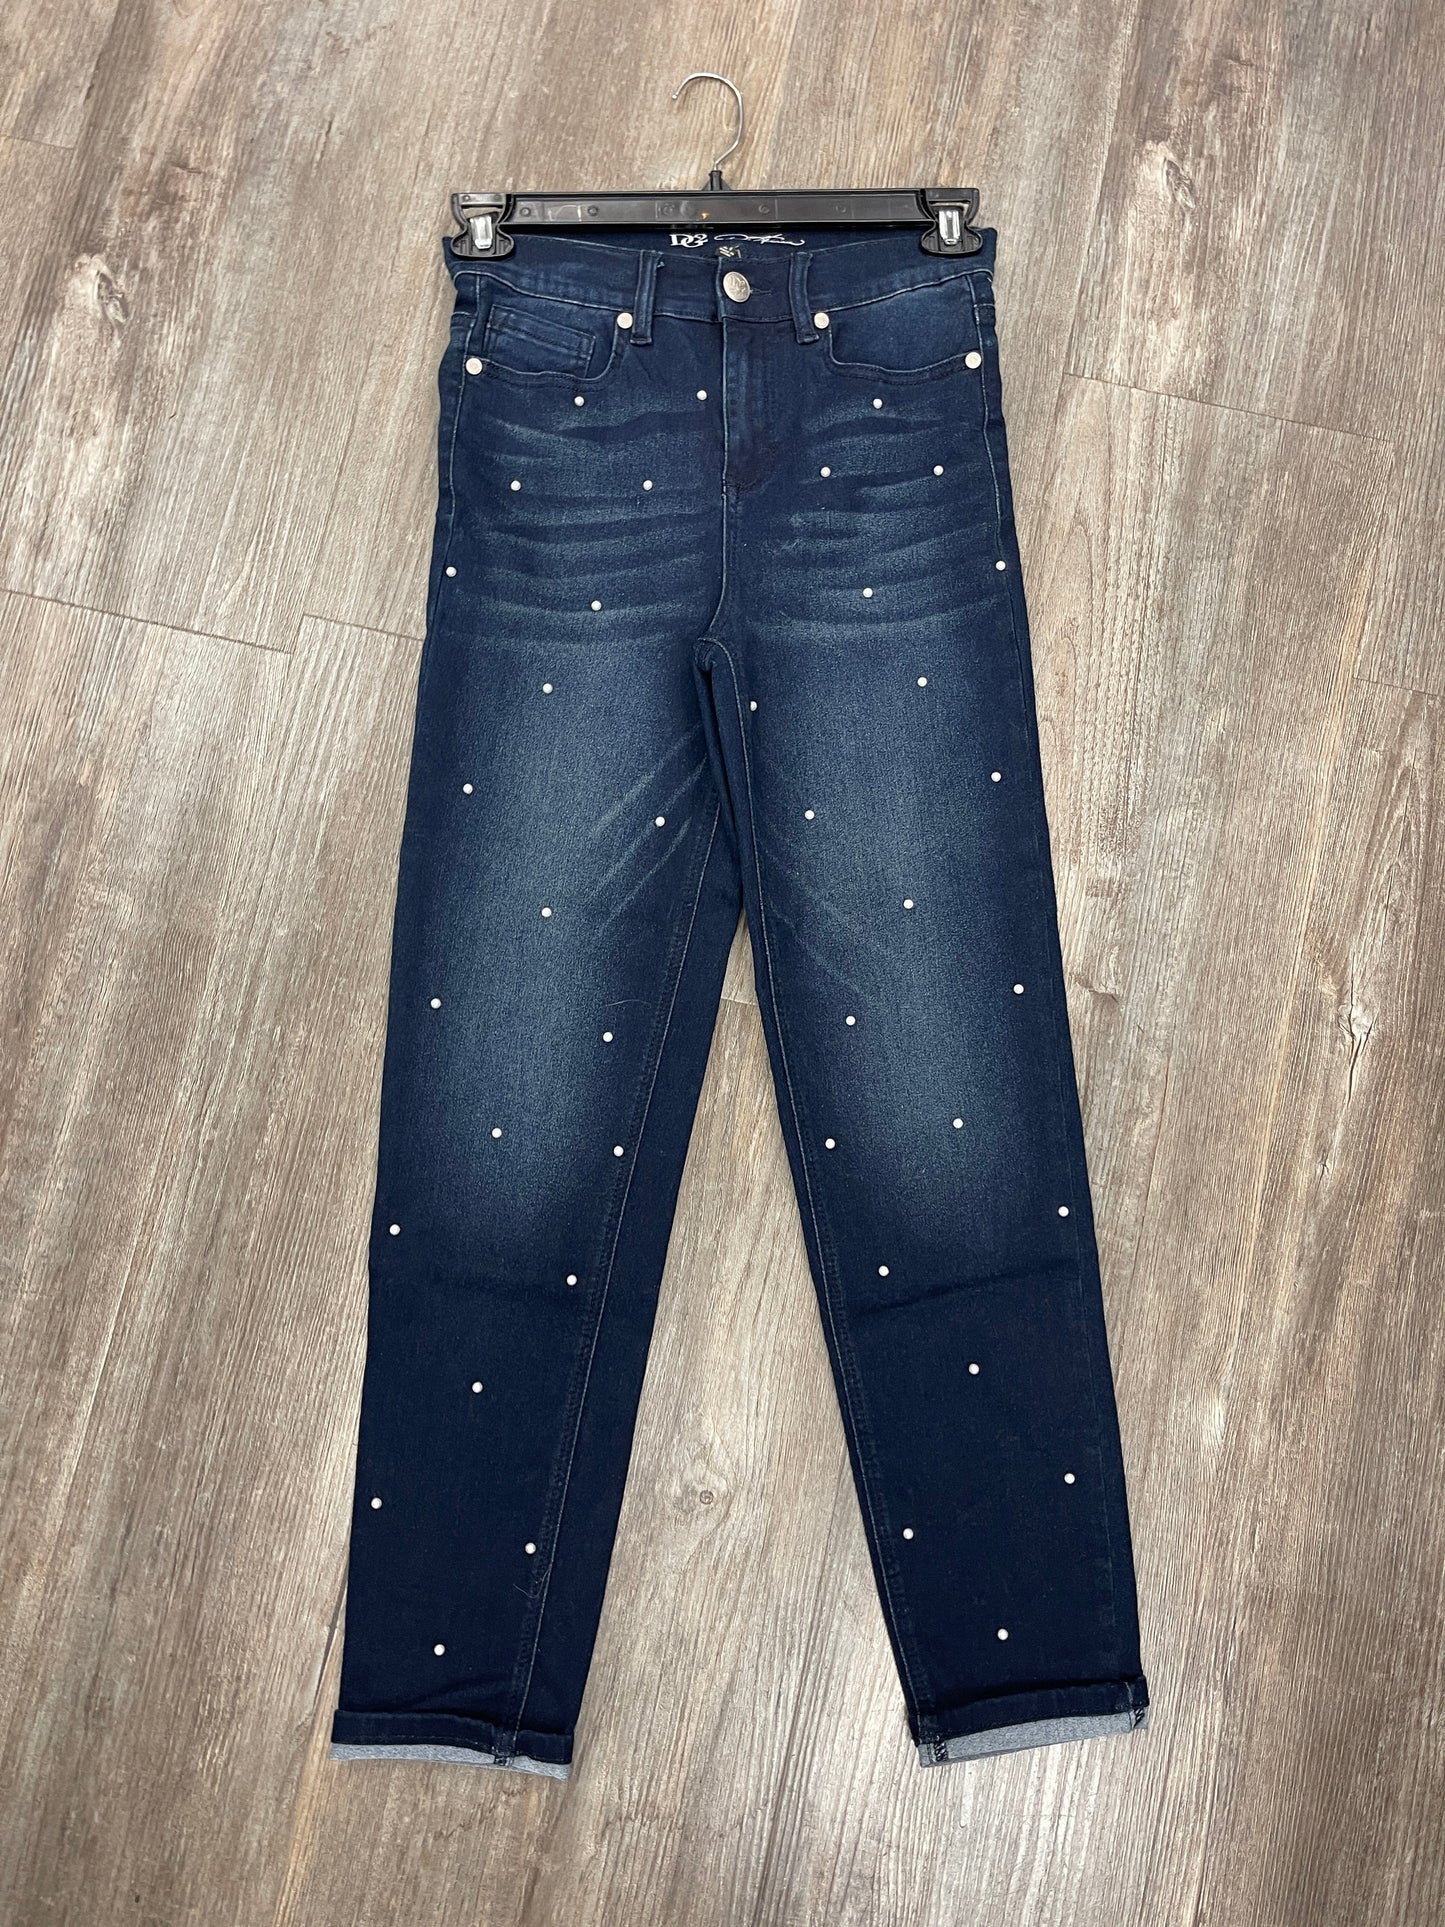 Jeans Cropped By Cmc  Size: 2